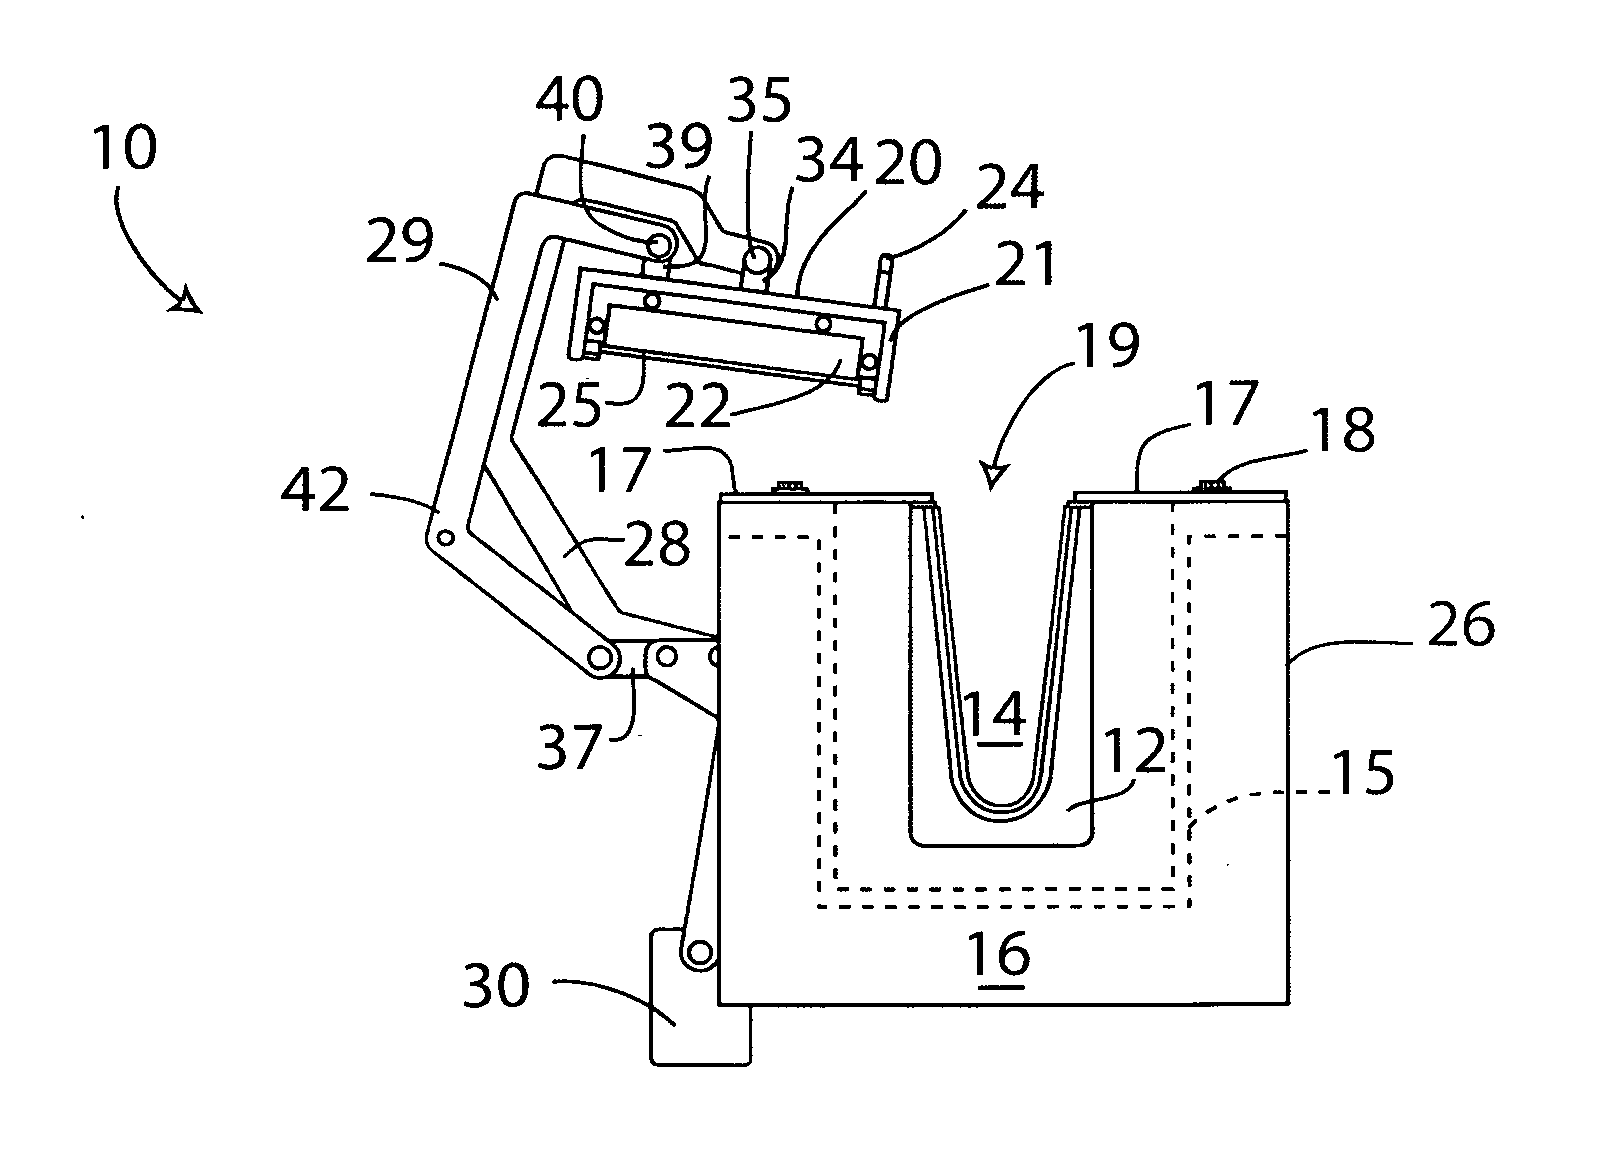 Molten metal containment structure having movable cover